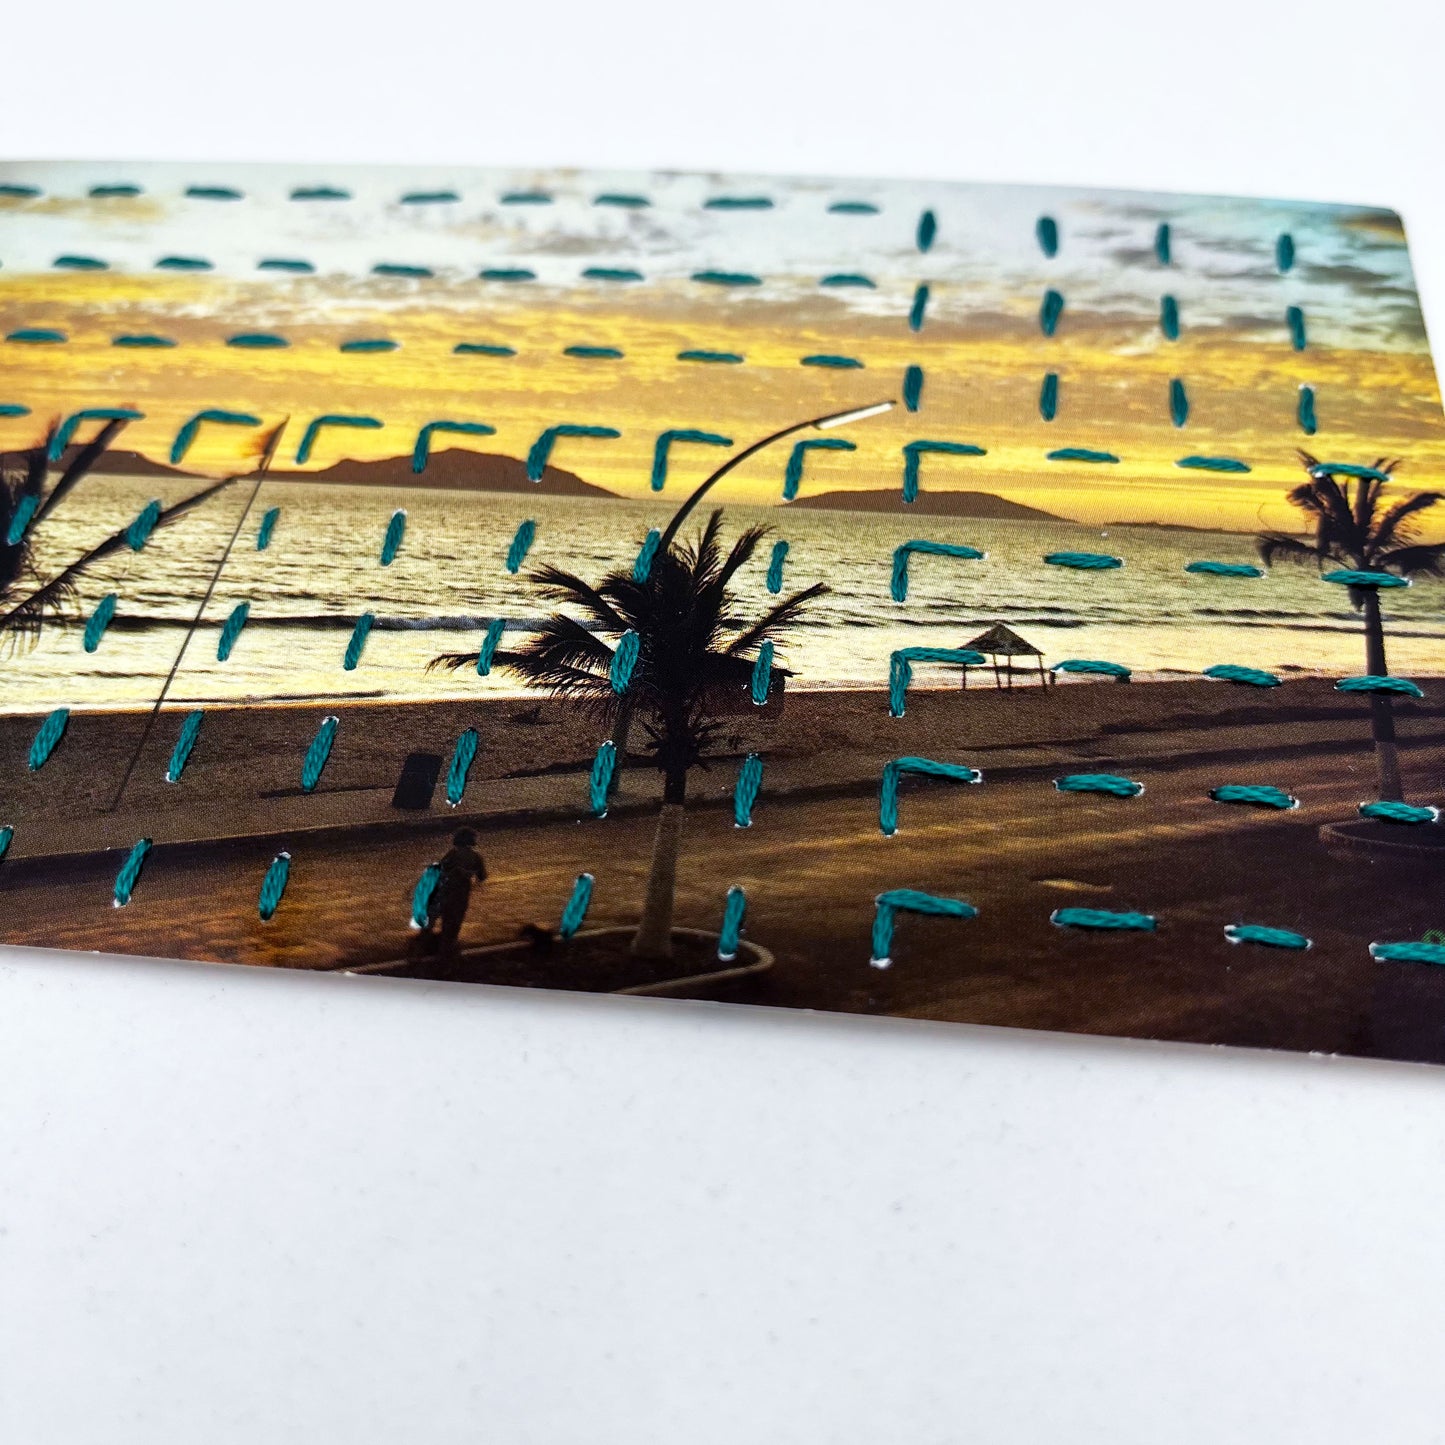 a vintage postcard of a beach sunset in Mazatlan Mexico, hand stitched over with a basketweave running stitch pattern in teal